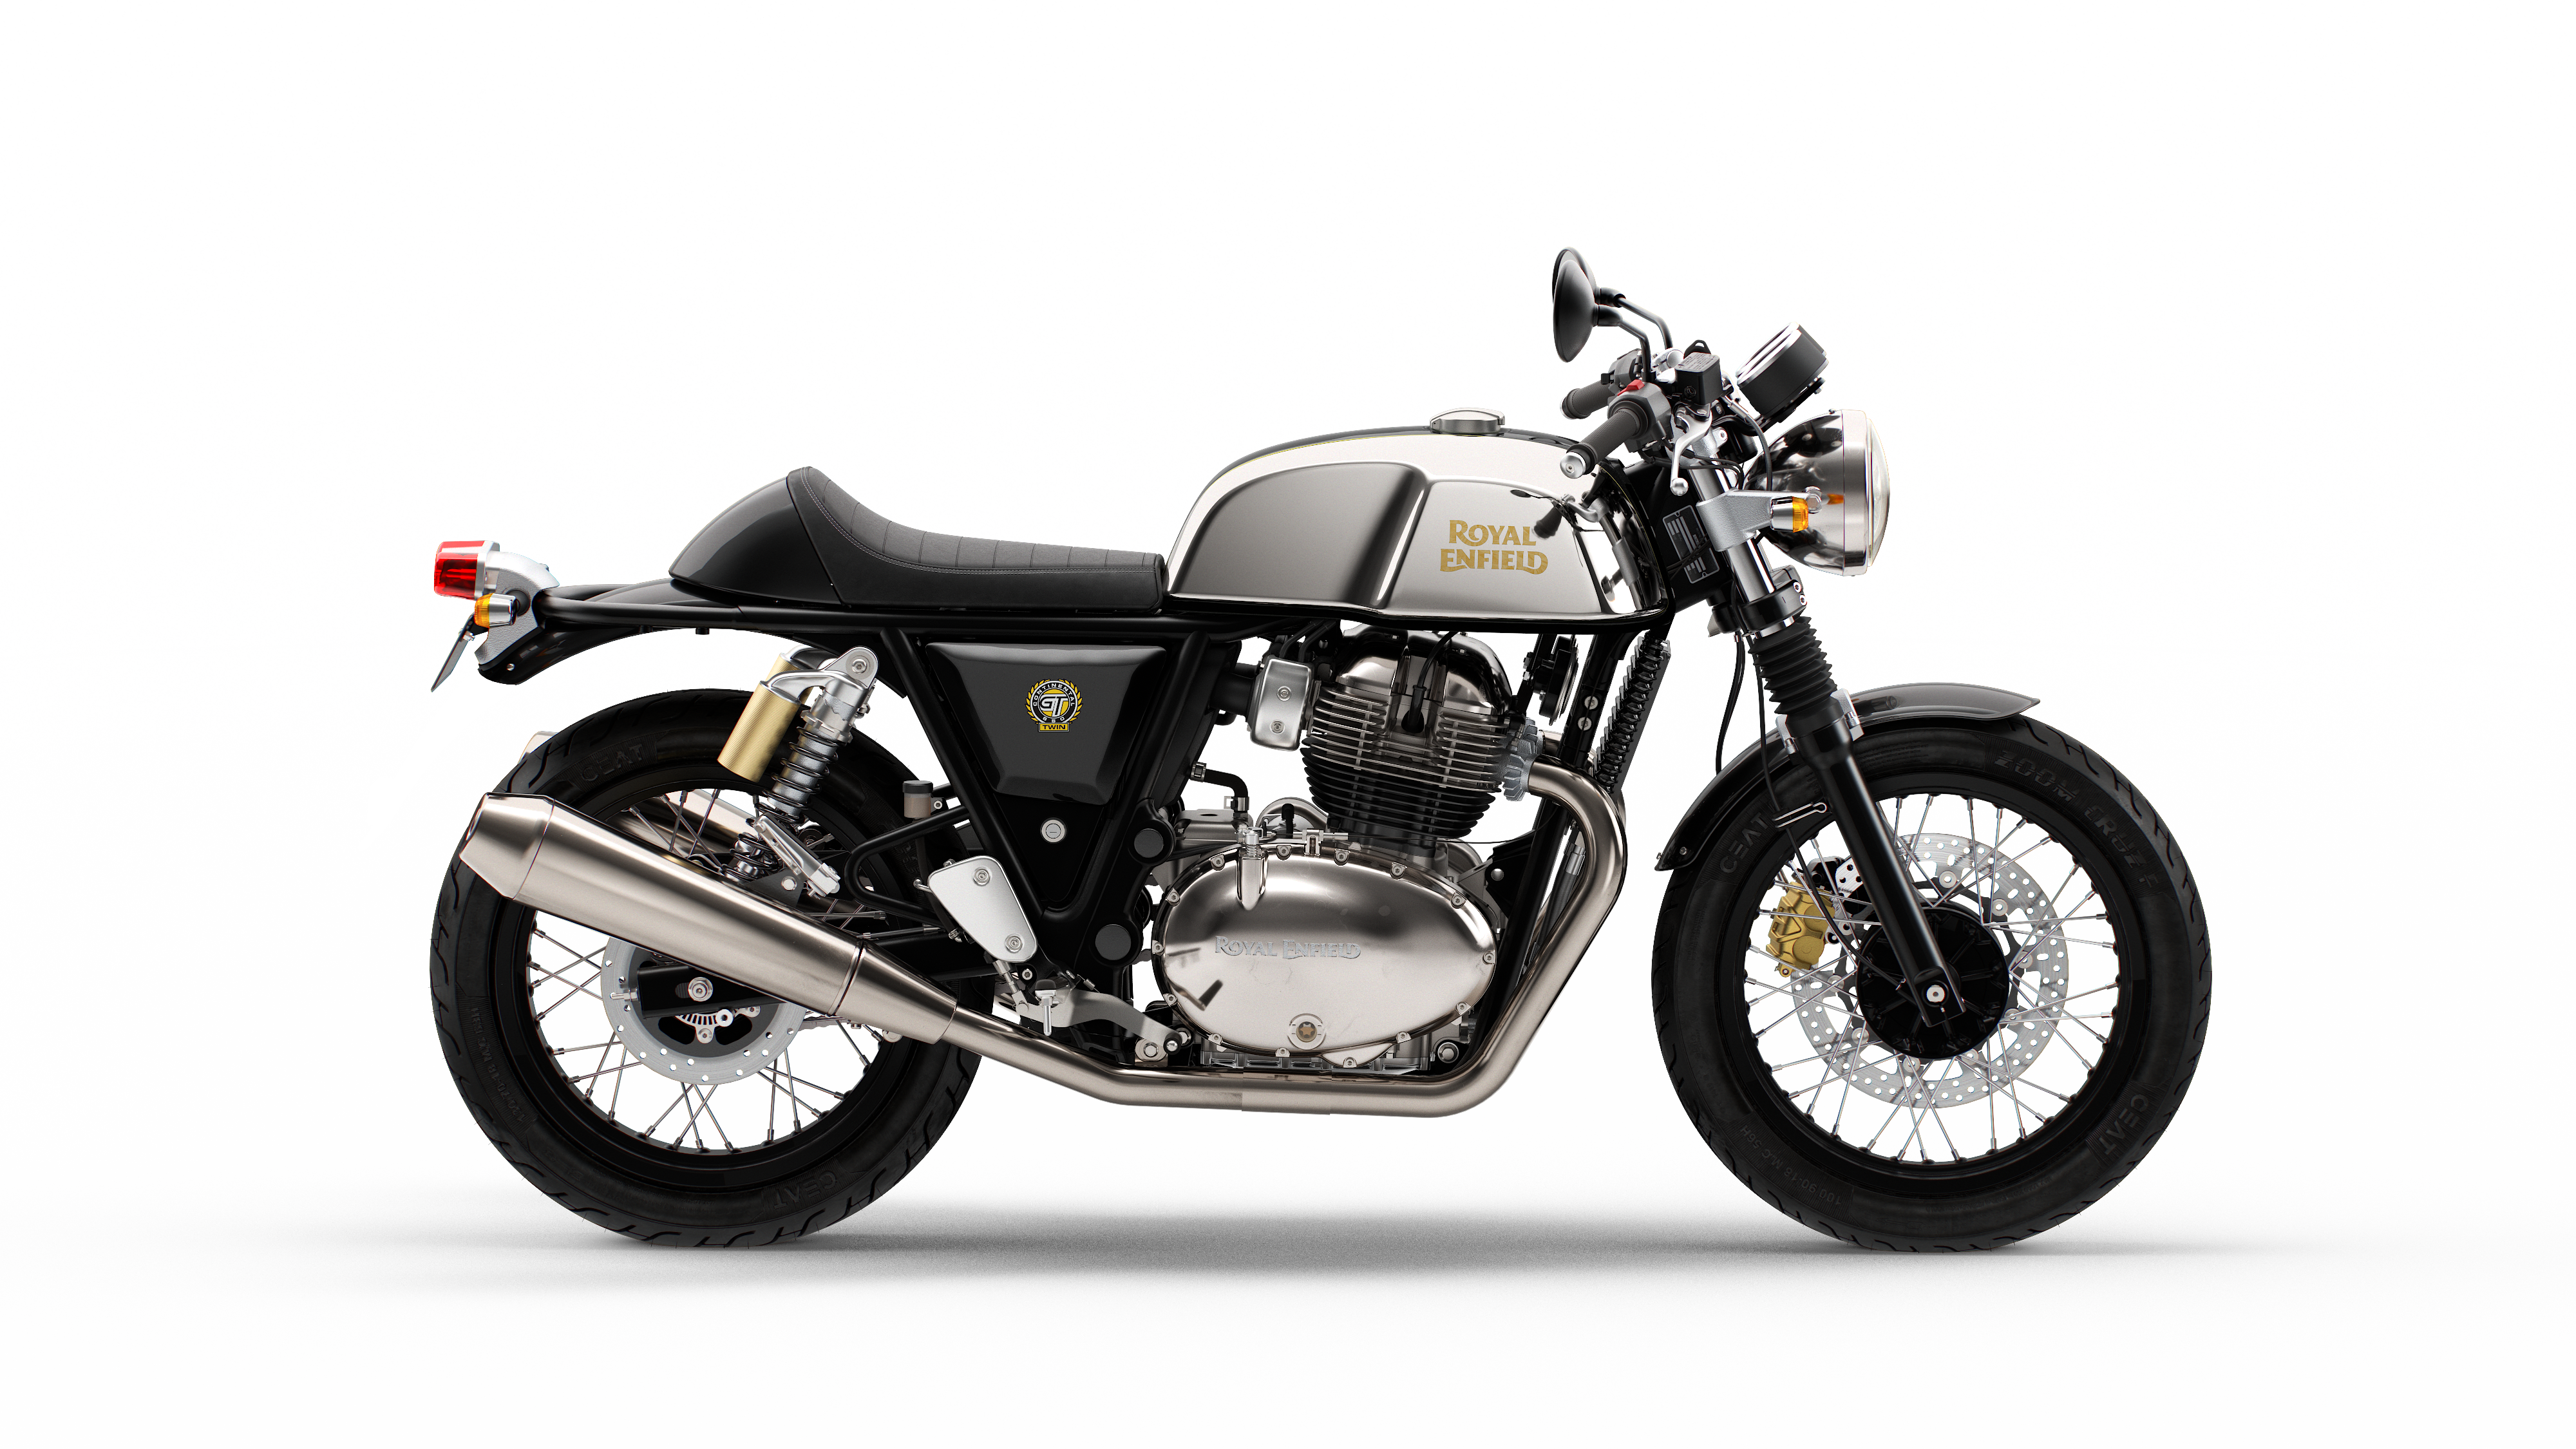 CONTINENTAL GT650